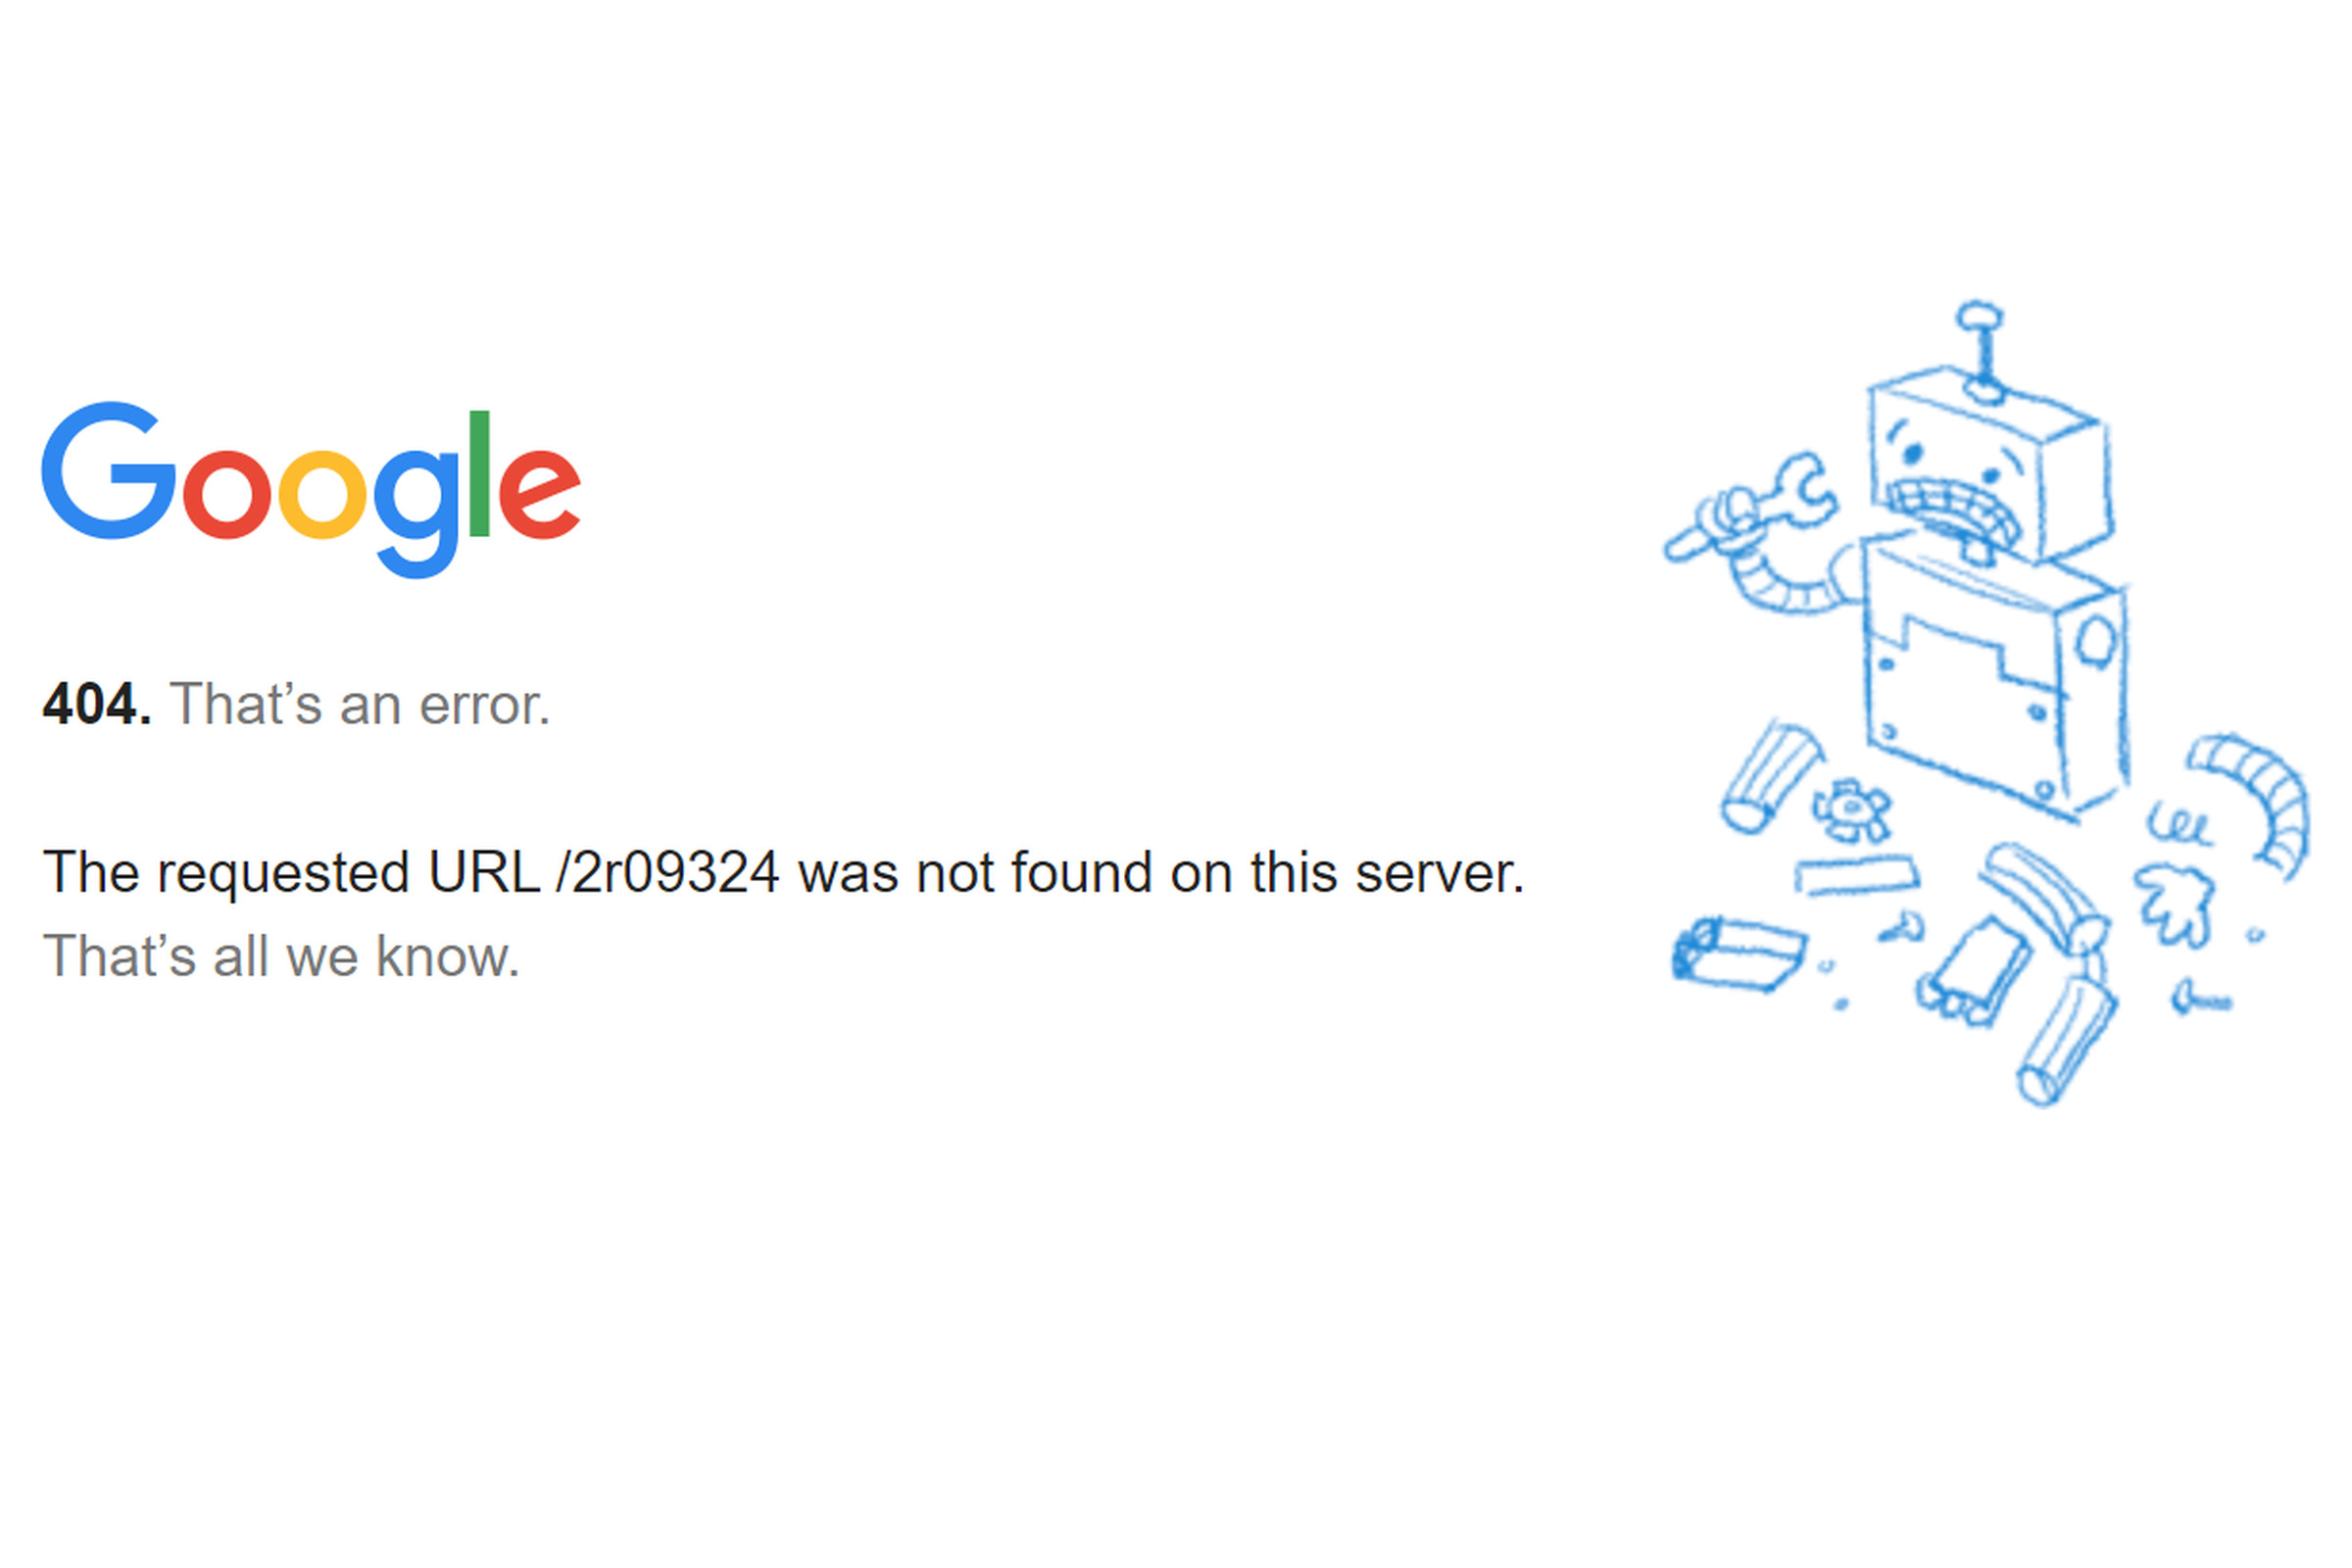 The browser will detect whenever a site generates a 404 error code, such as this one from Google.